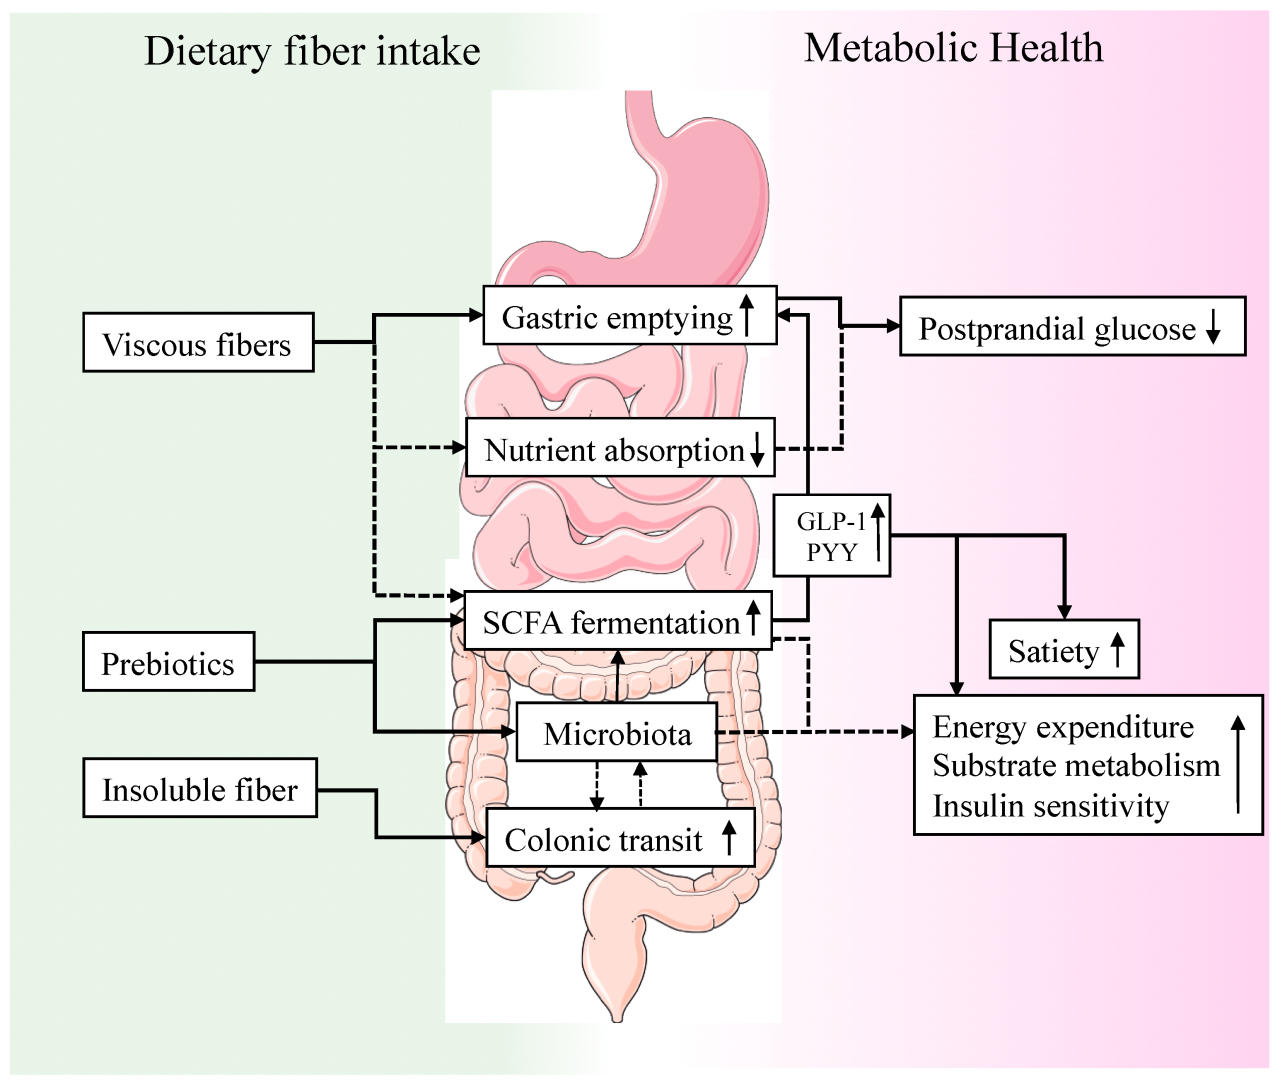 Decreases intestinal transit time and exposure to potential toxins